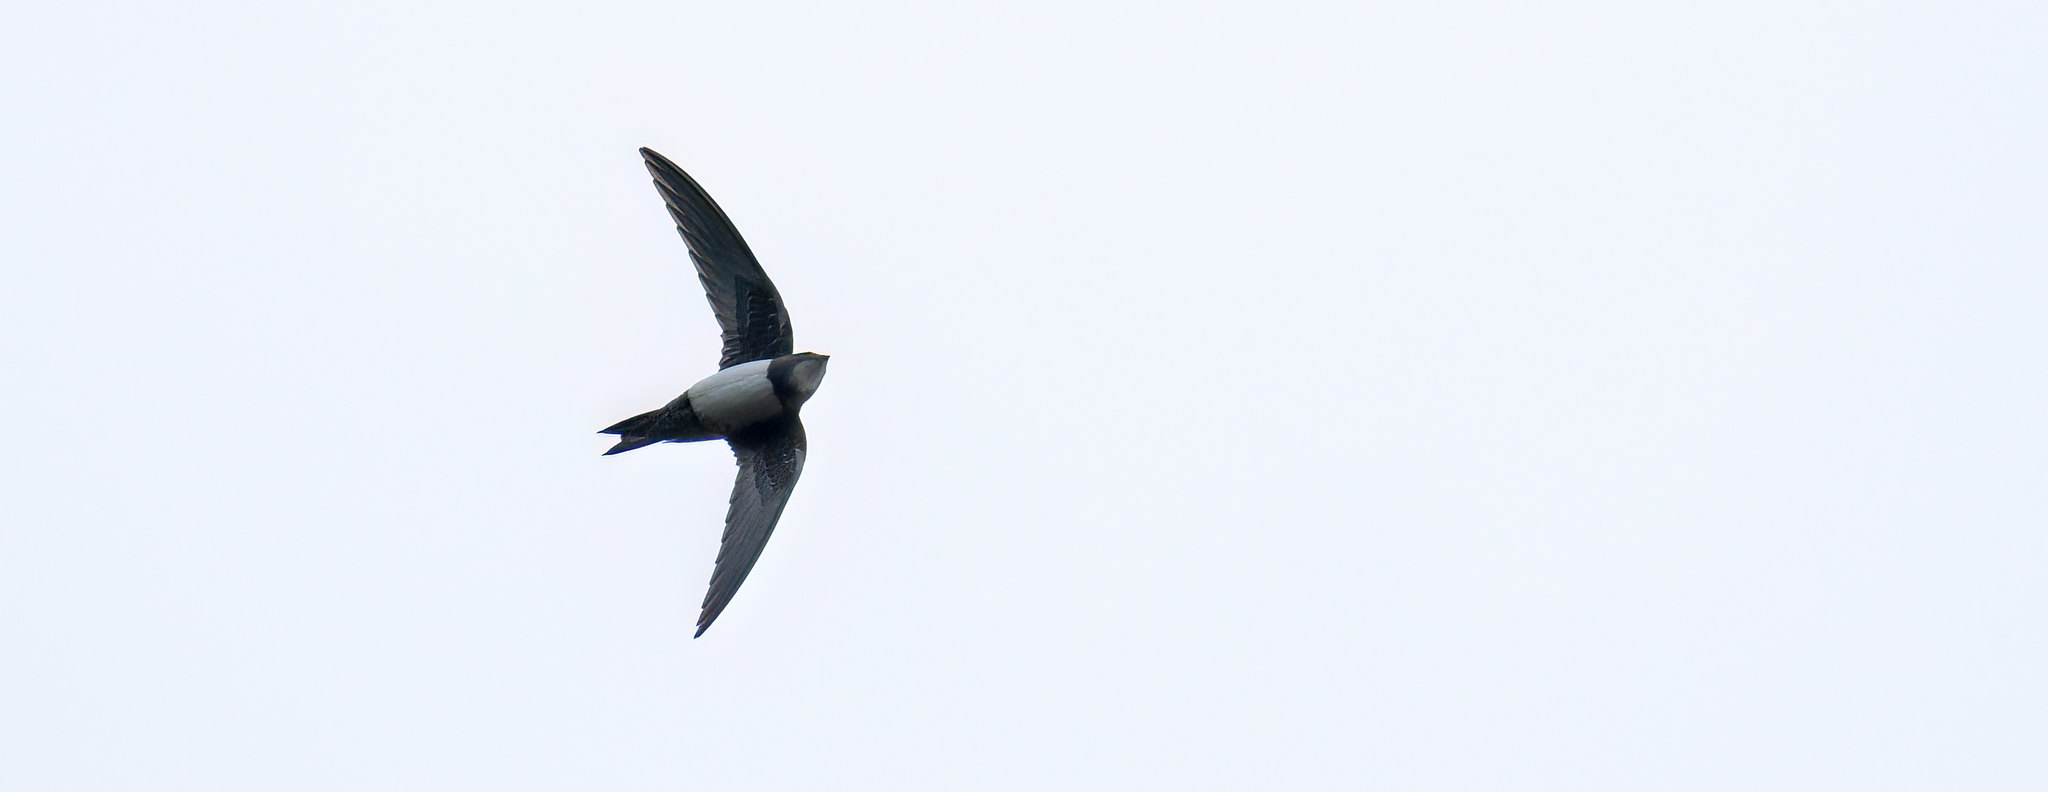 Alpine Swift - a dismal day and we should've gone to see the Chapel St. Leonard's birds - hey-ho :-(